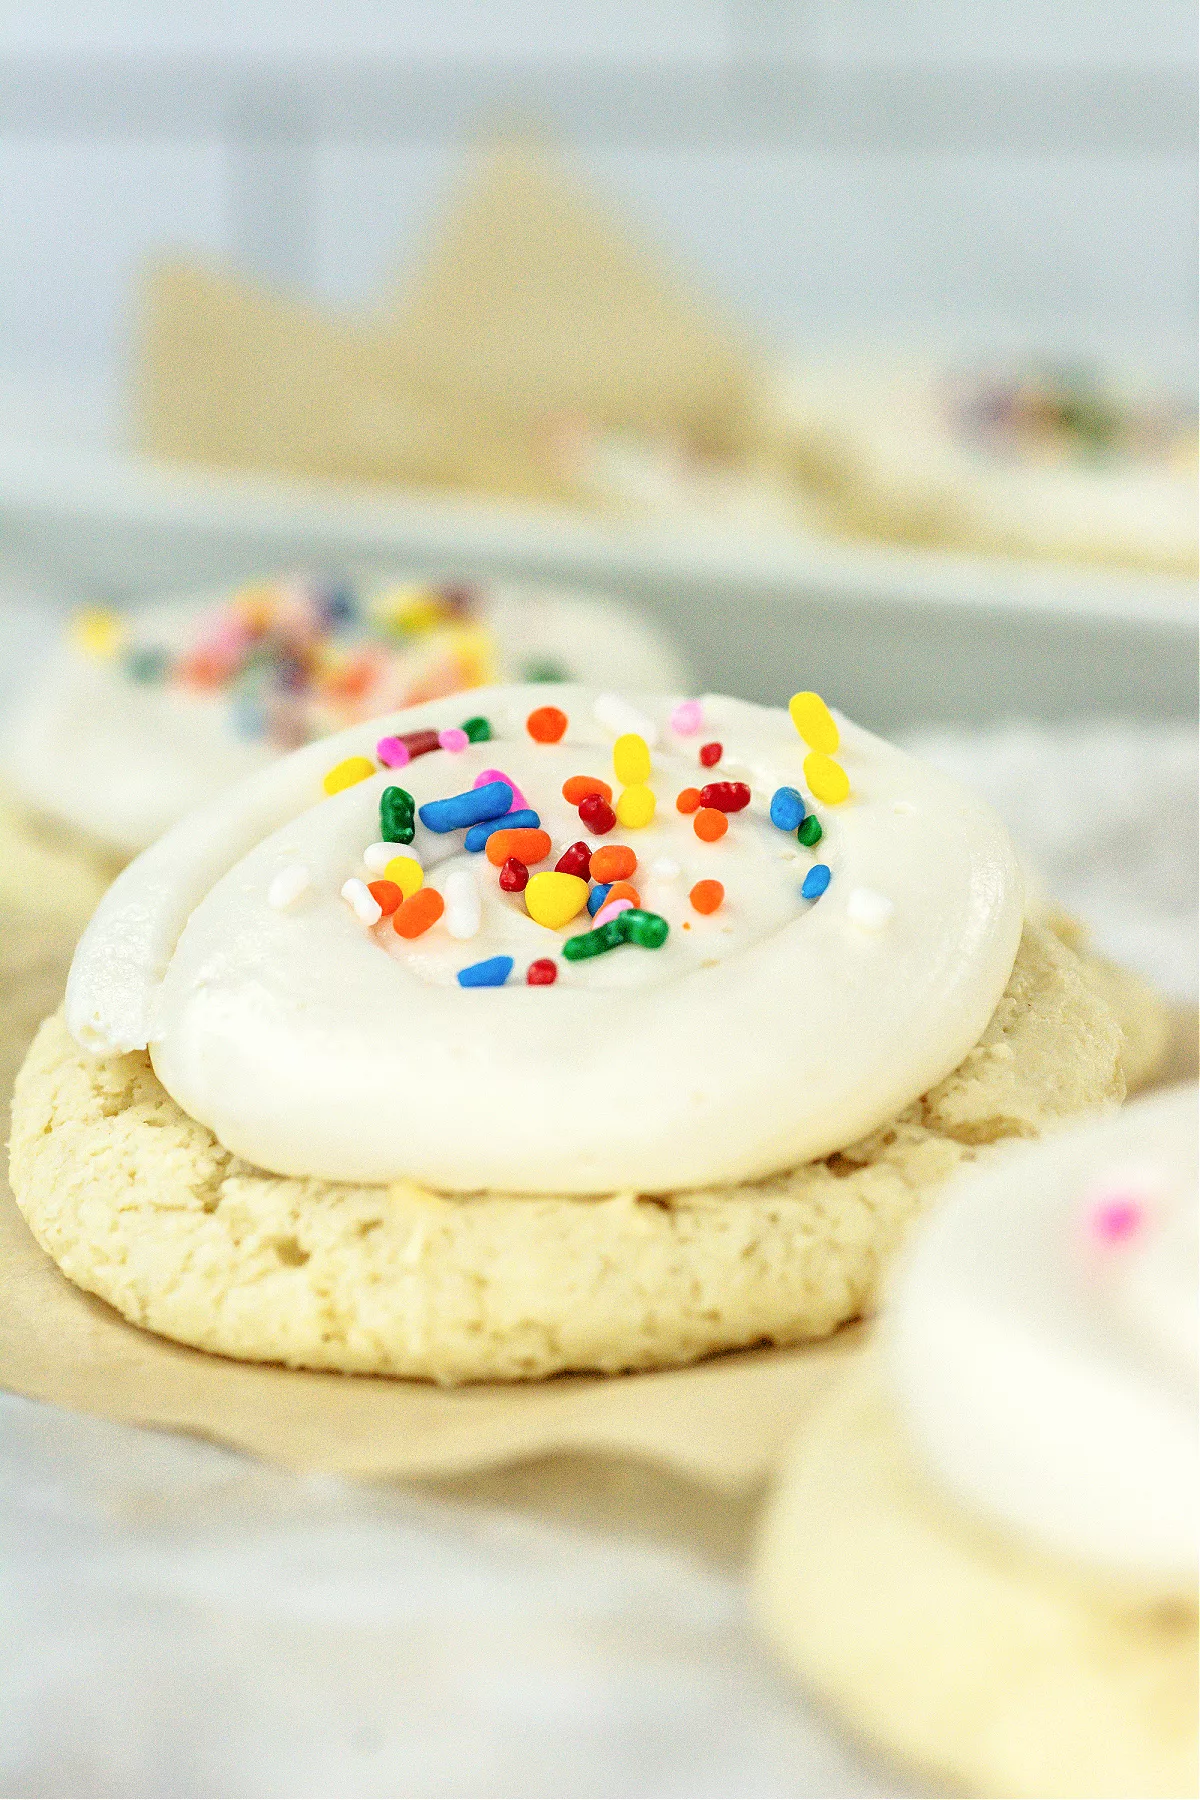 Cookies with frosting and sprinkles on top